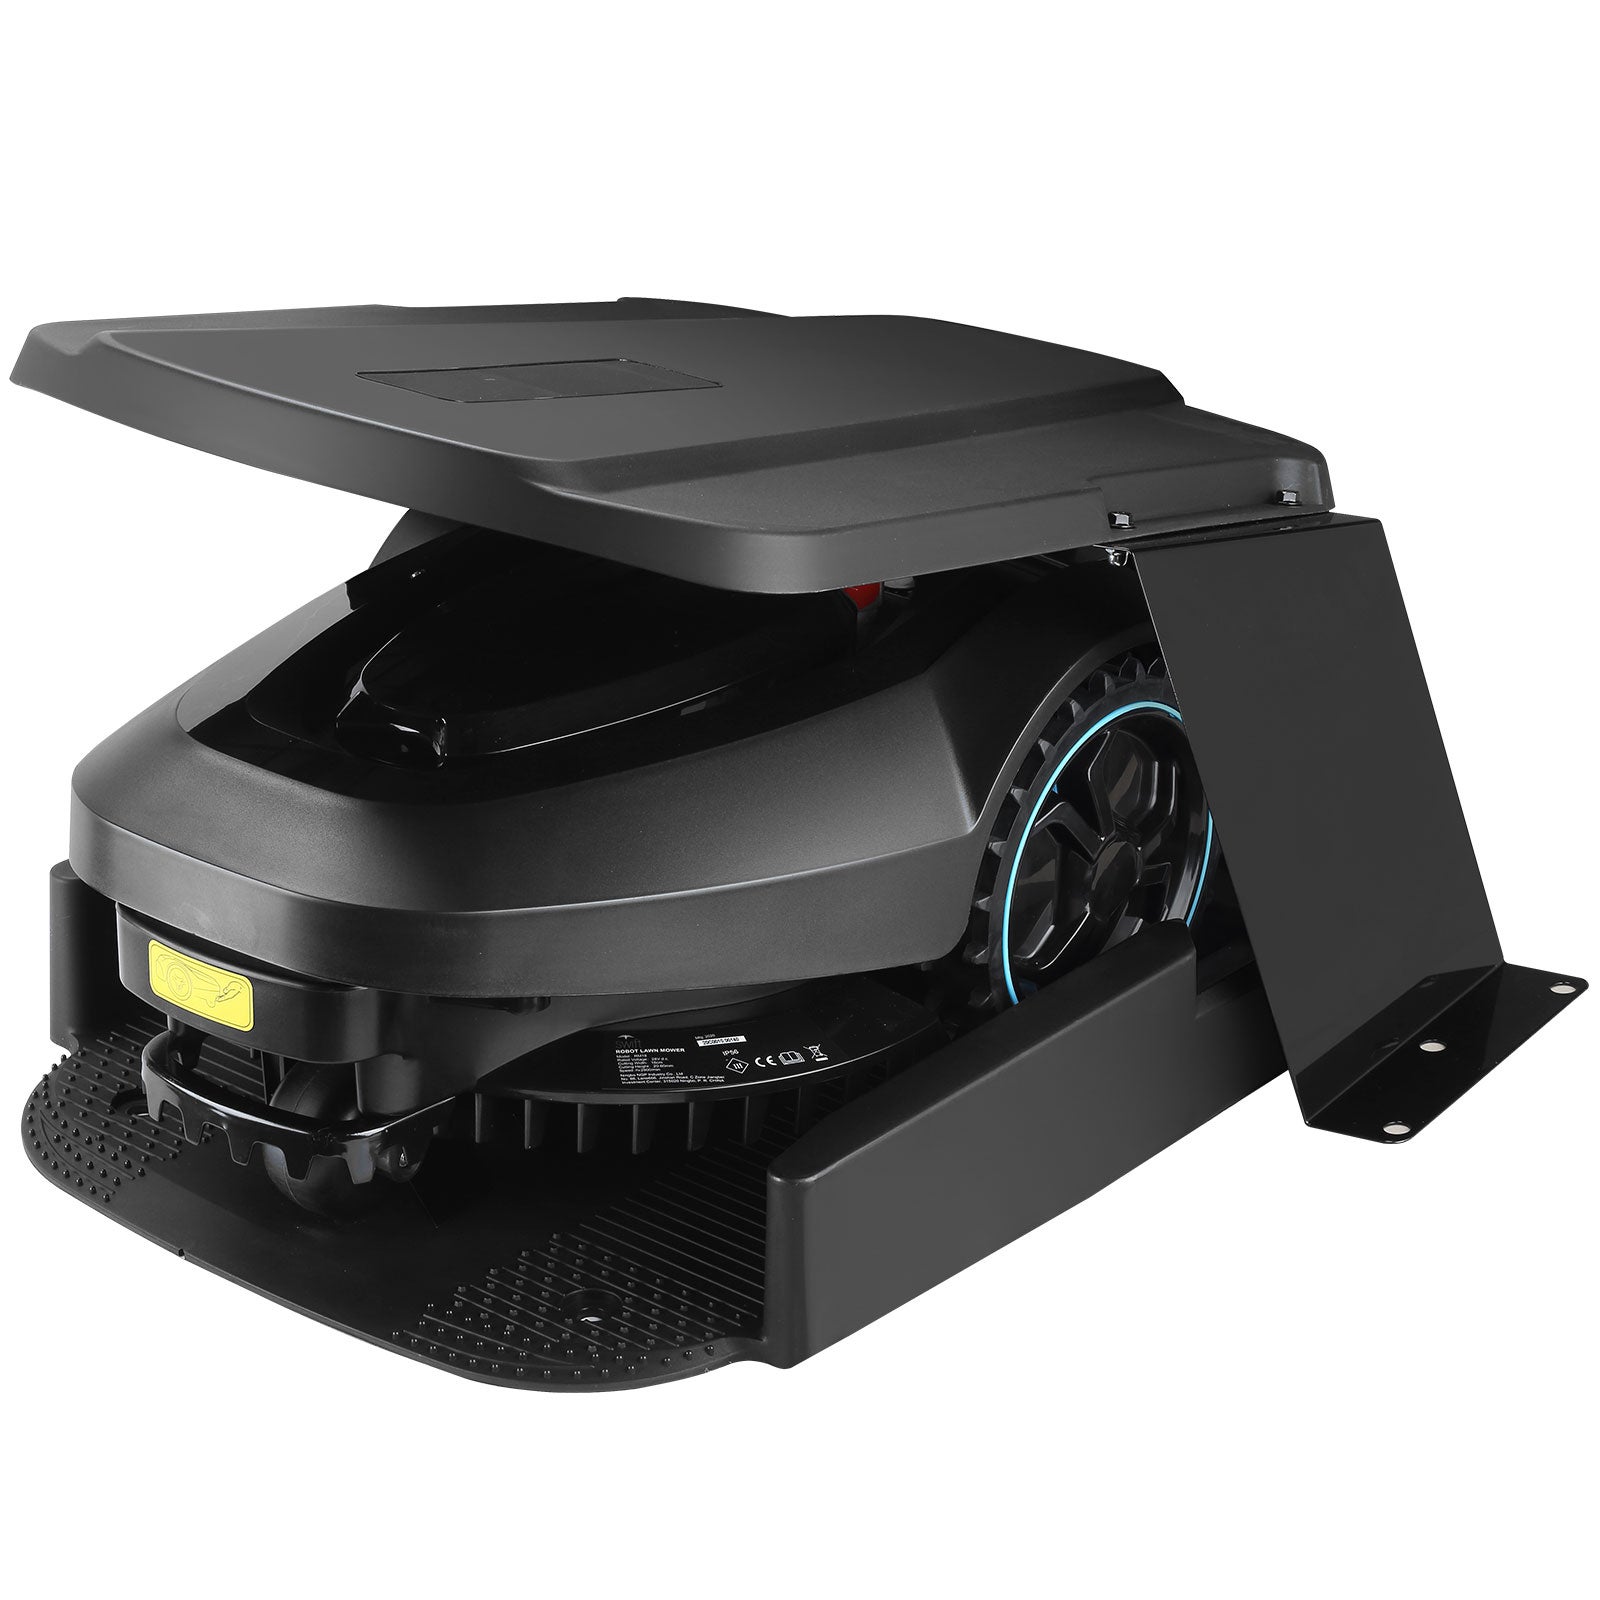 28V Robot Mower Auto-Charging Self-Propelled Robotic Lawnmower Up to 600SQM